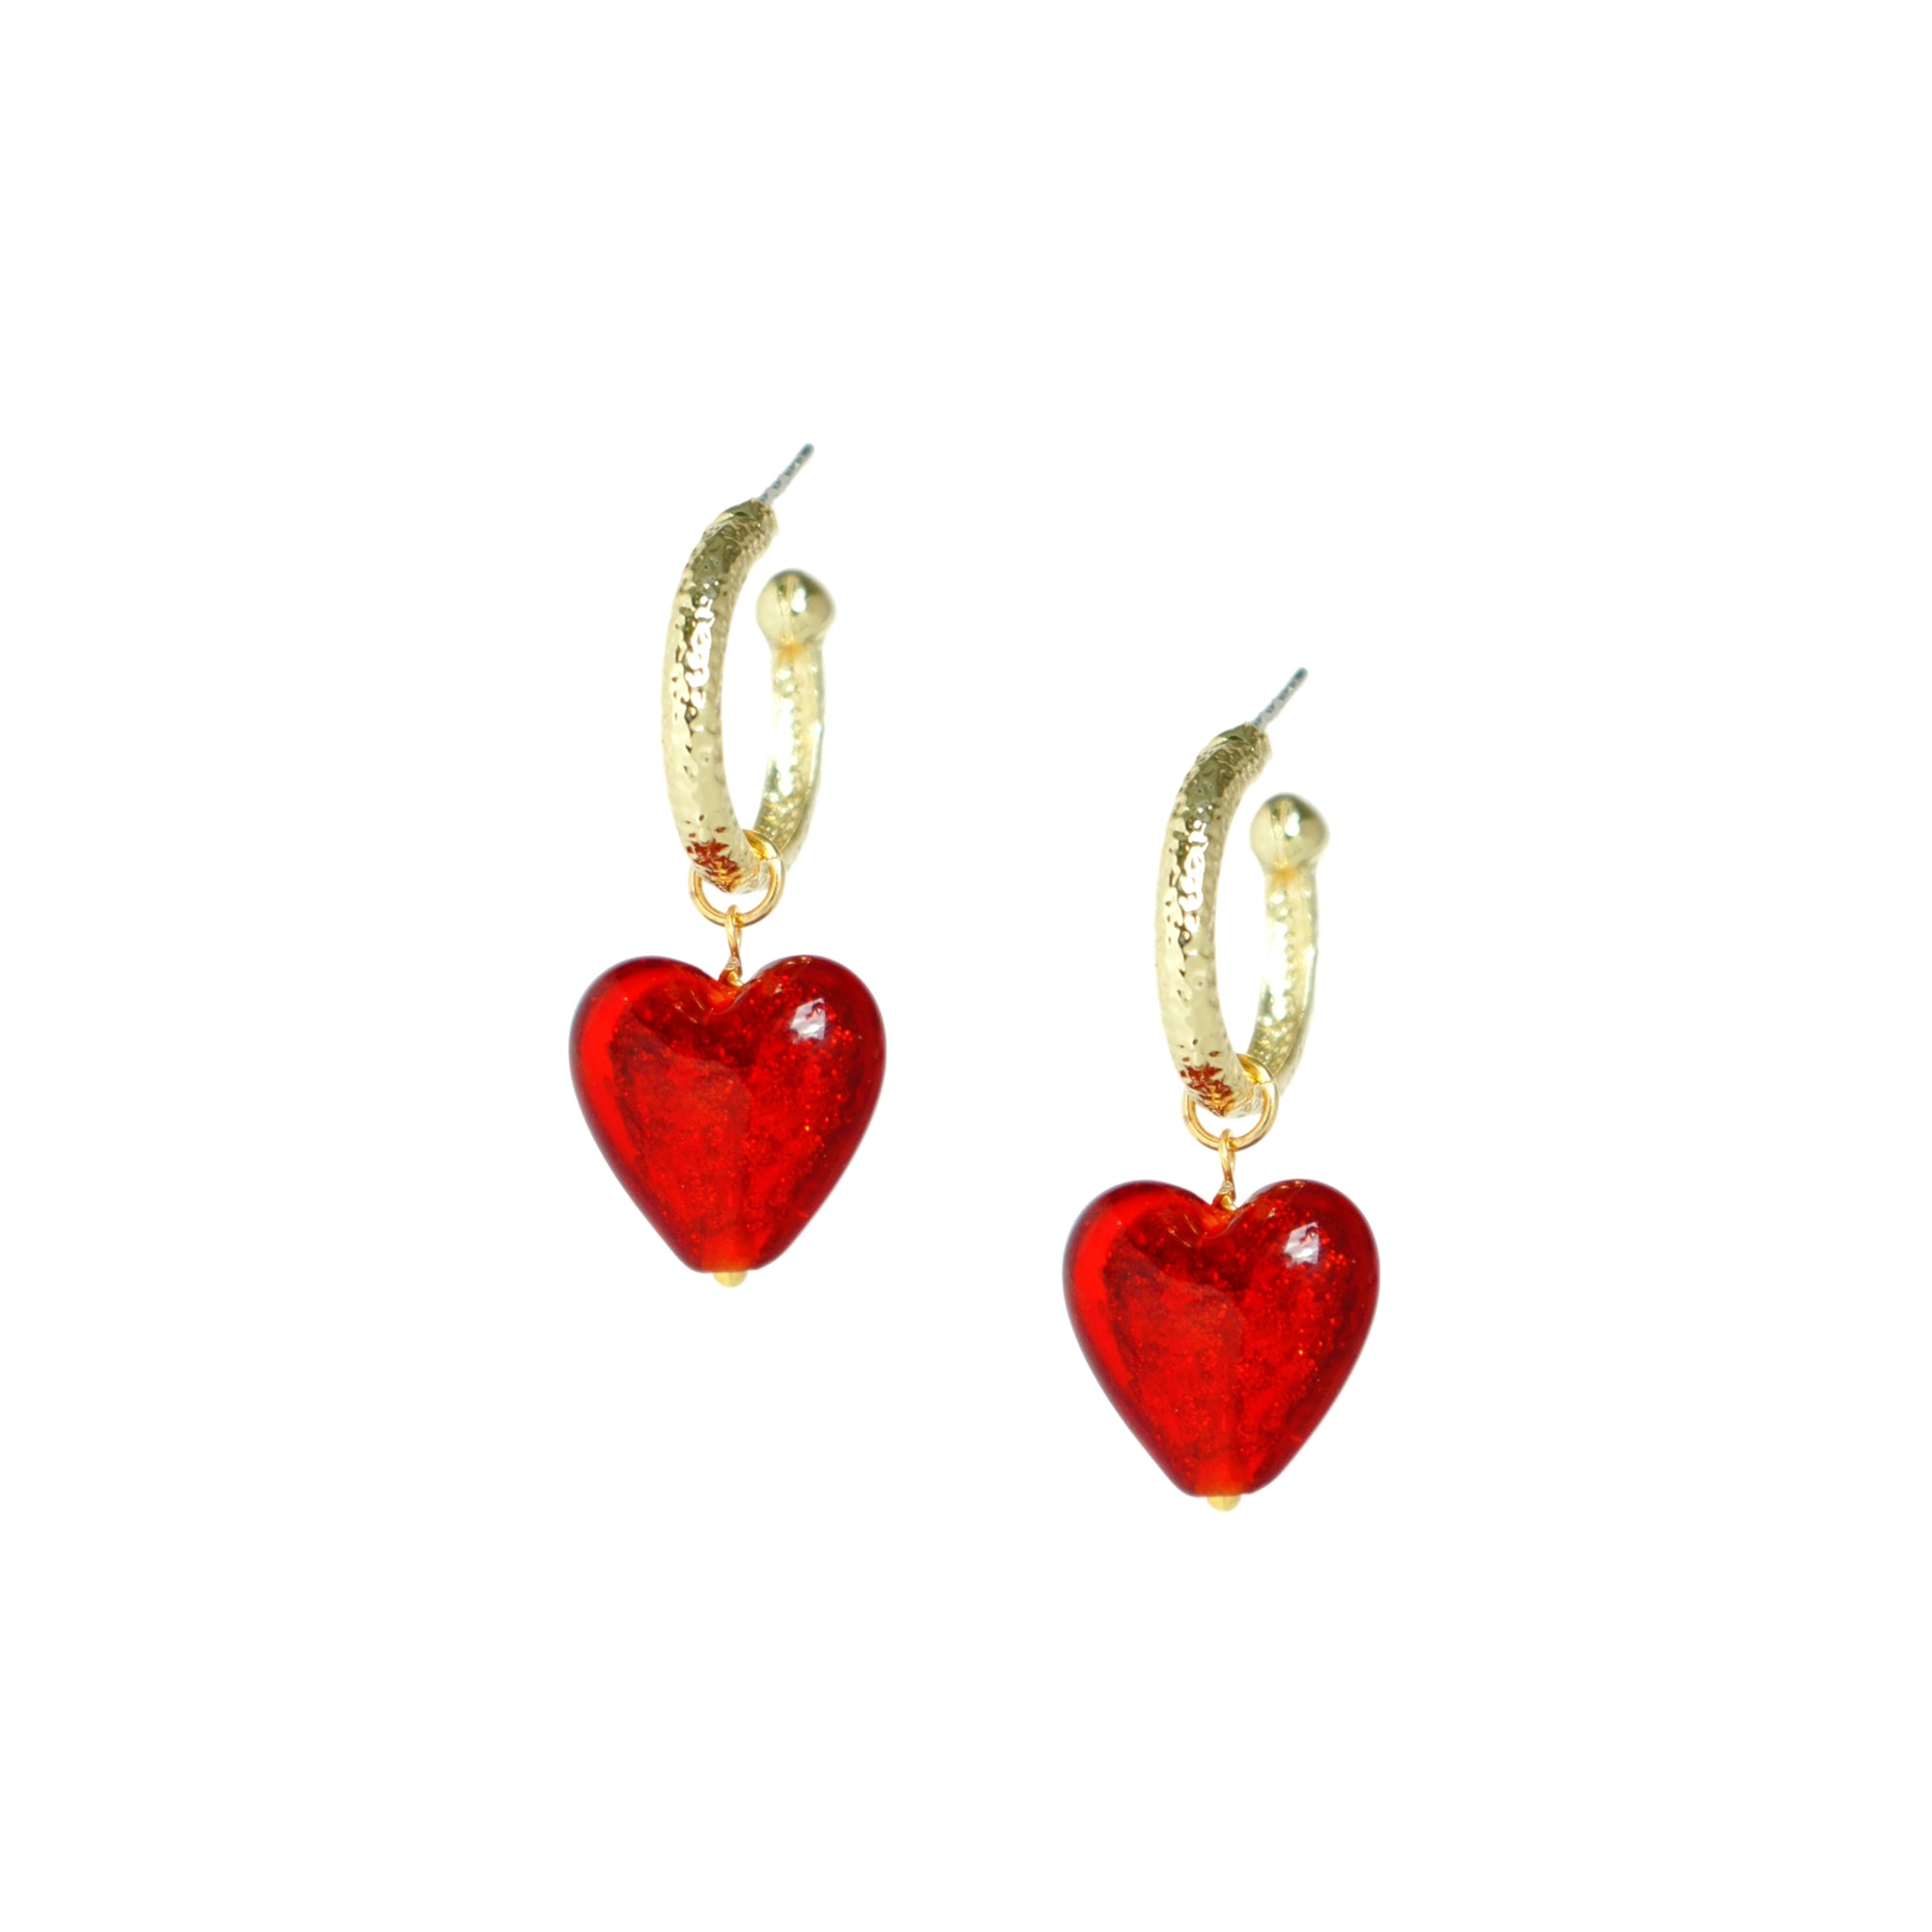 My Precious Lampwork Glass Heart Earrings with Textured Golden Hoops